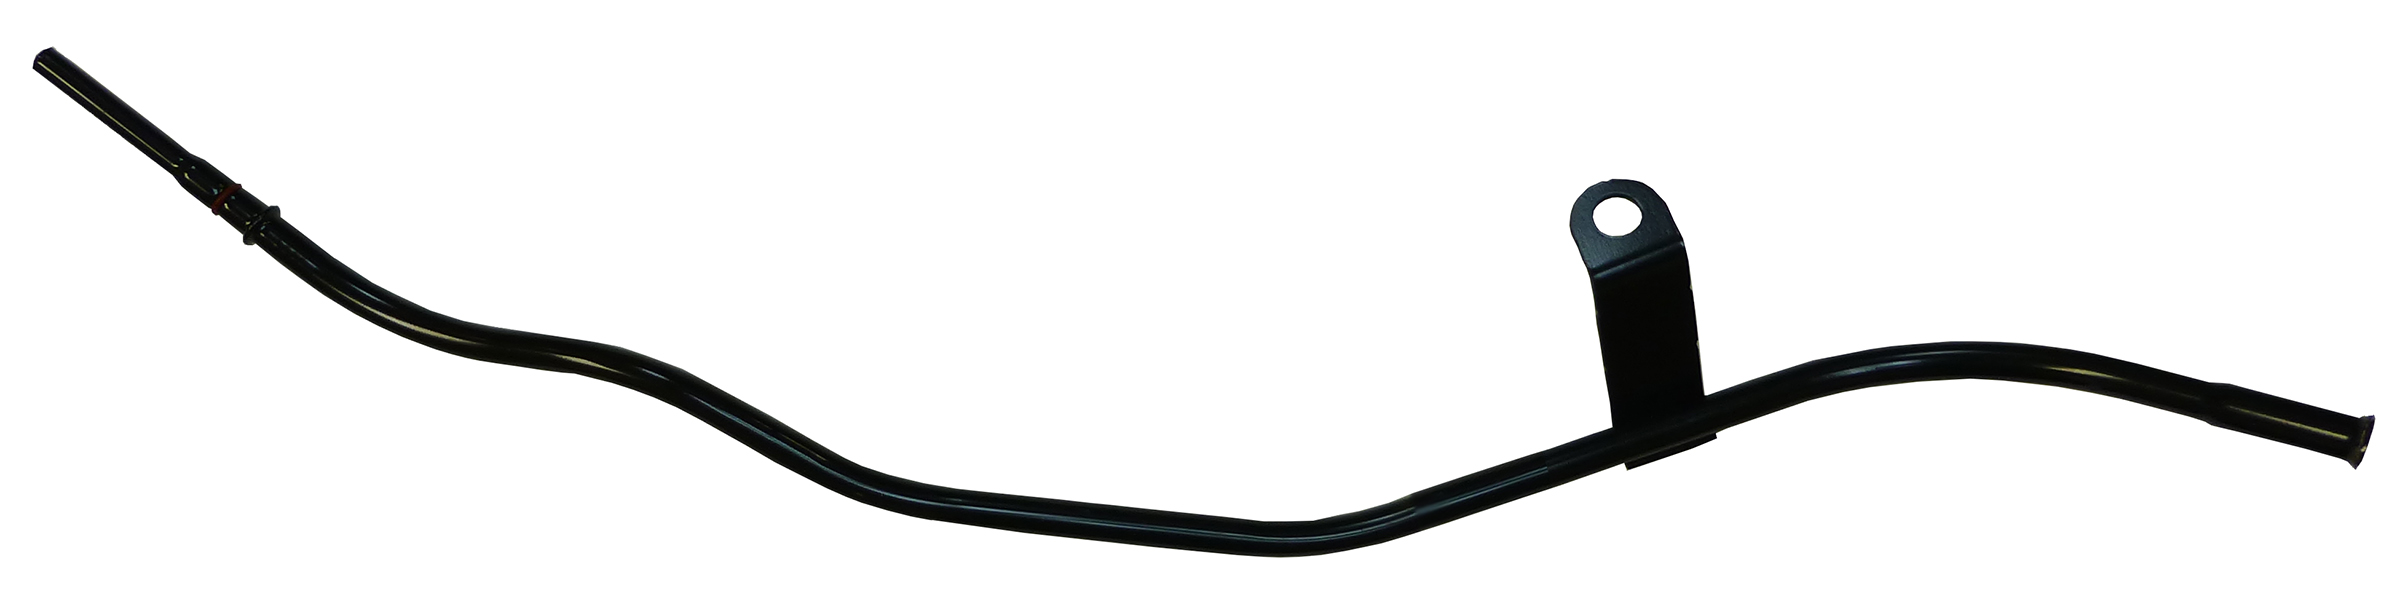 67-69 Camaro LS3 Oil Dipstick Tube for use with Retrofit Oil Pan